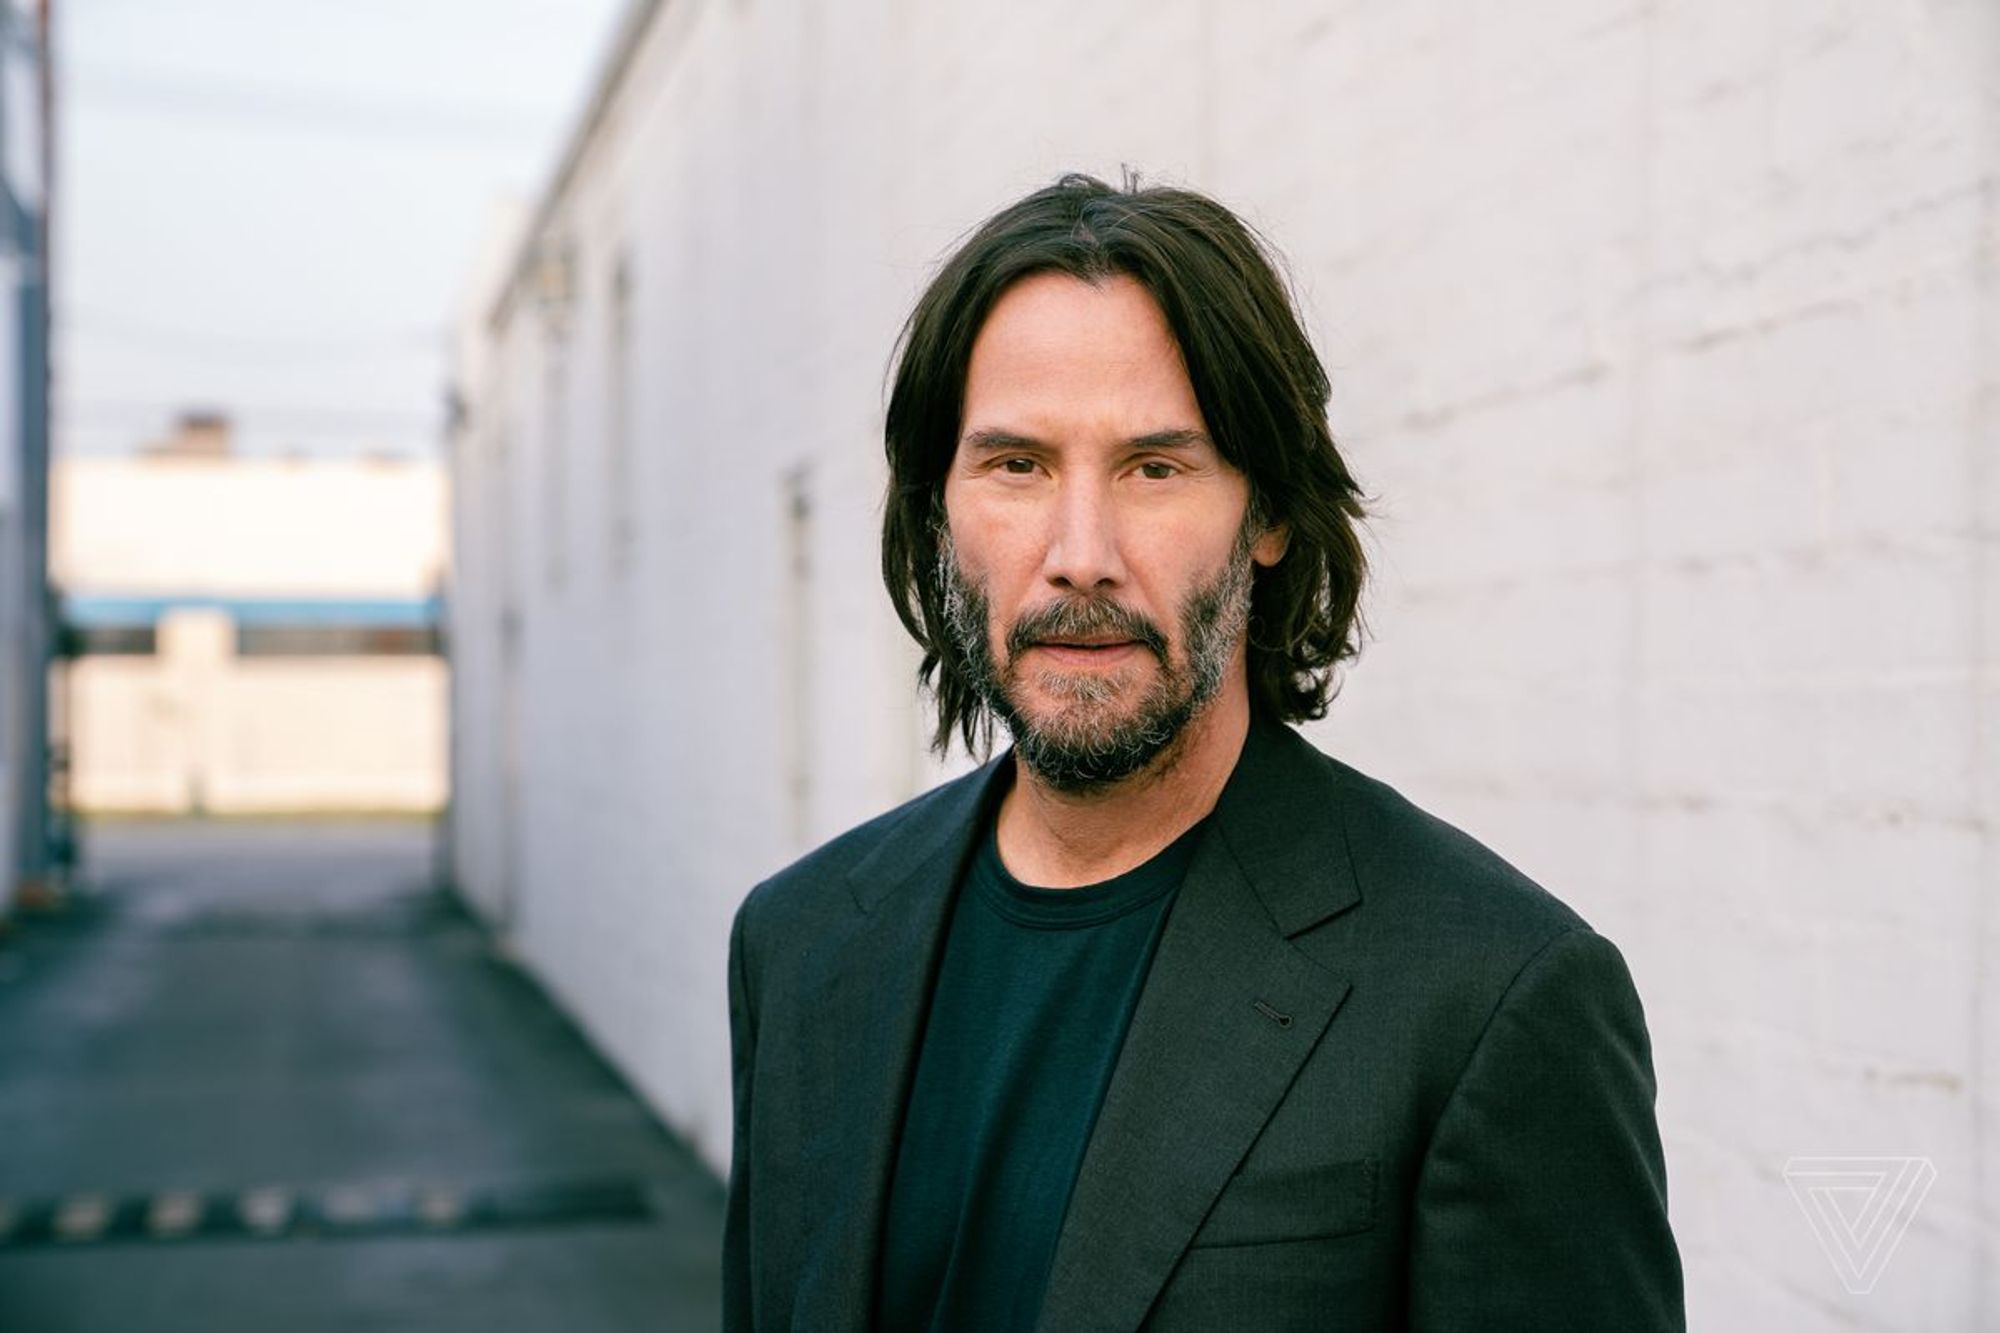 Keanu Reeves can’t stop laughing at the idea of NFTs - The Verge